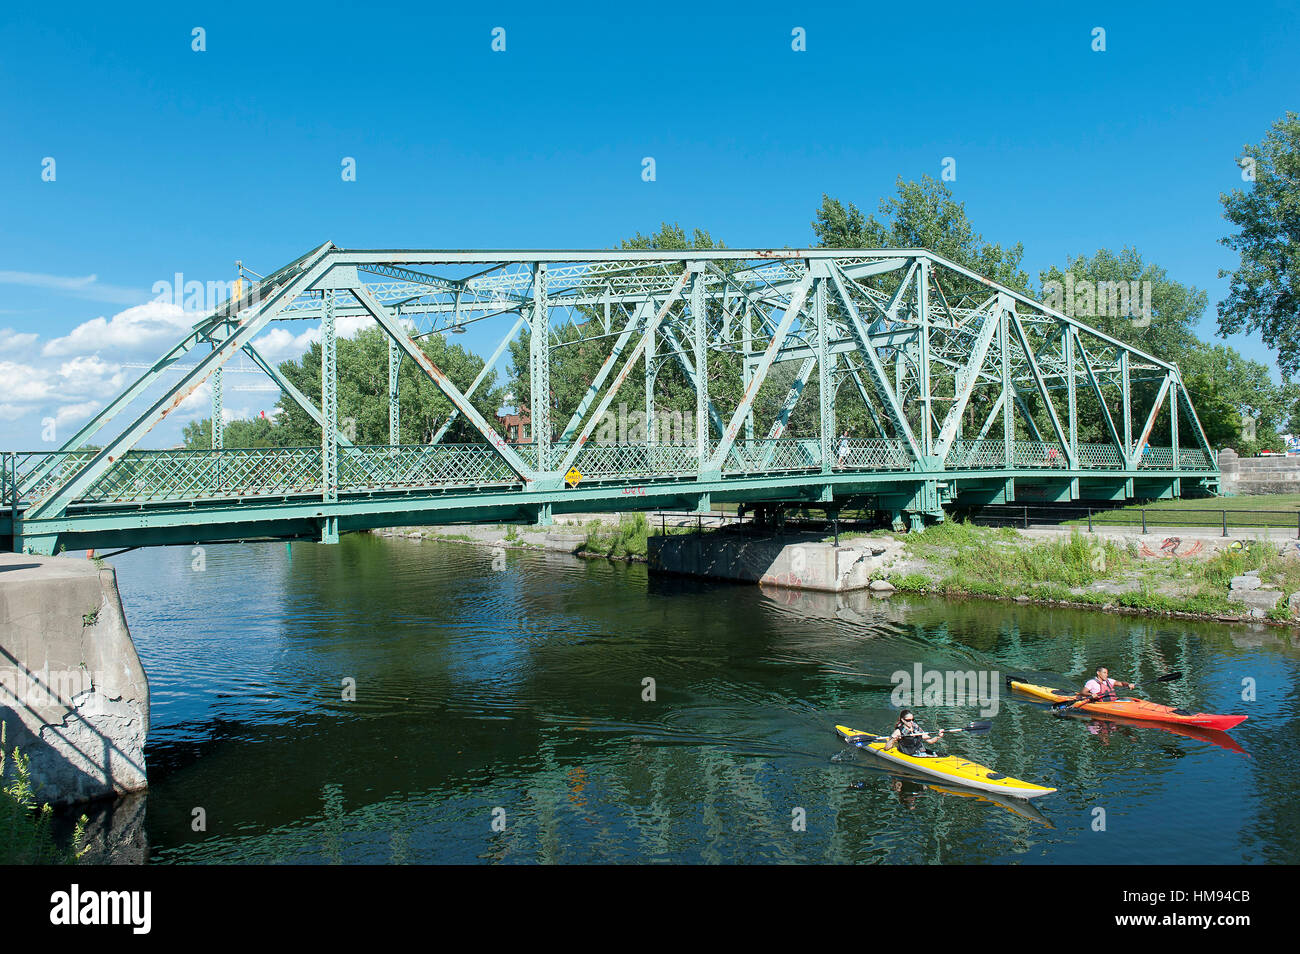 Canada, Province of Quebec. Montreal. Districts of southwest. The Lachine canal site. The Atwater footbridge Stock Photo